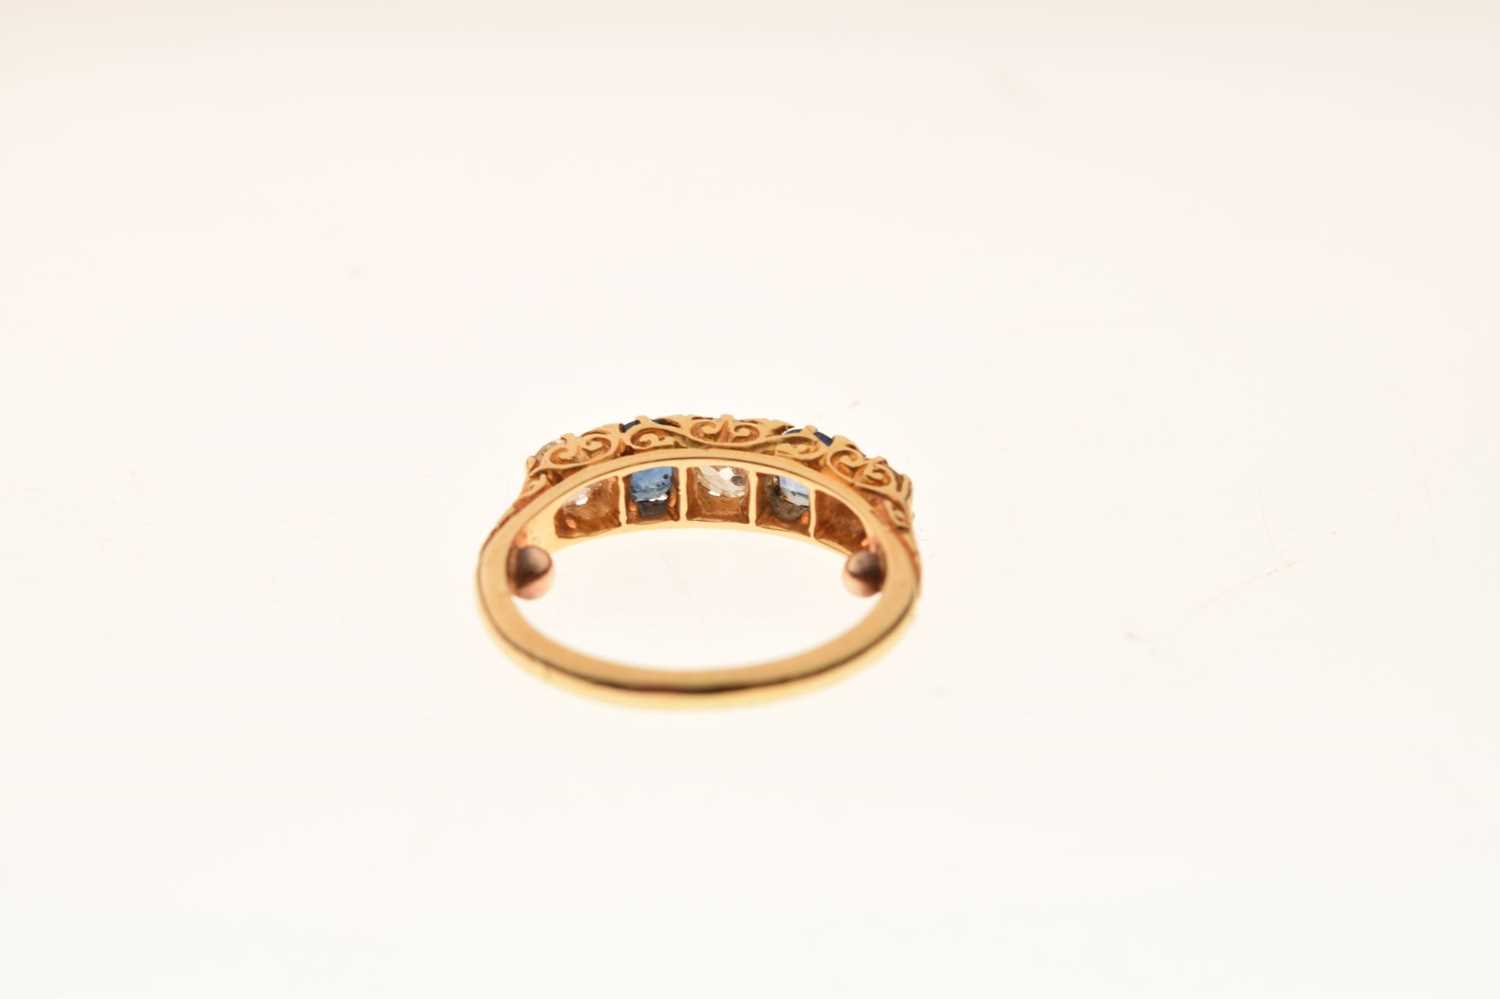 Five-stone diamond and sapphire ring - Image 4 of 6